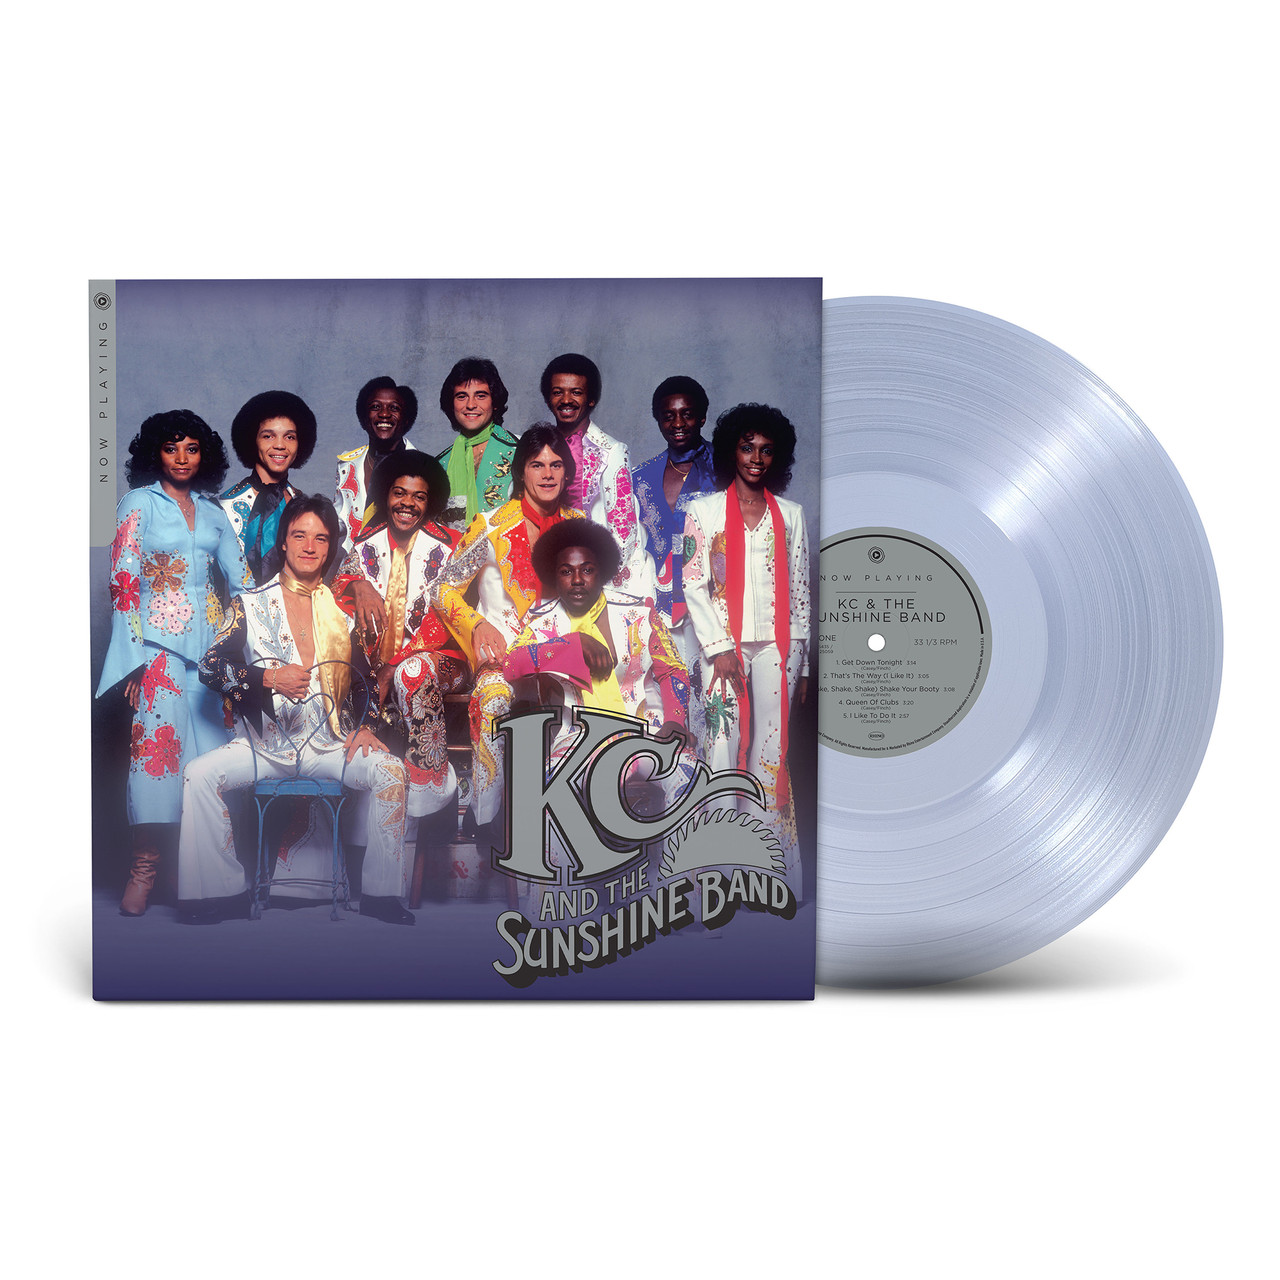 KC & THE SUNSHINE BAND – NOW PLAYING glitter ball clear vinyl LP